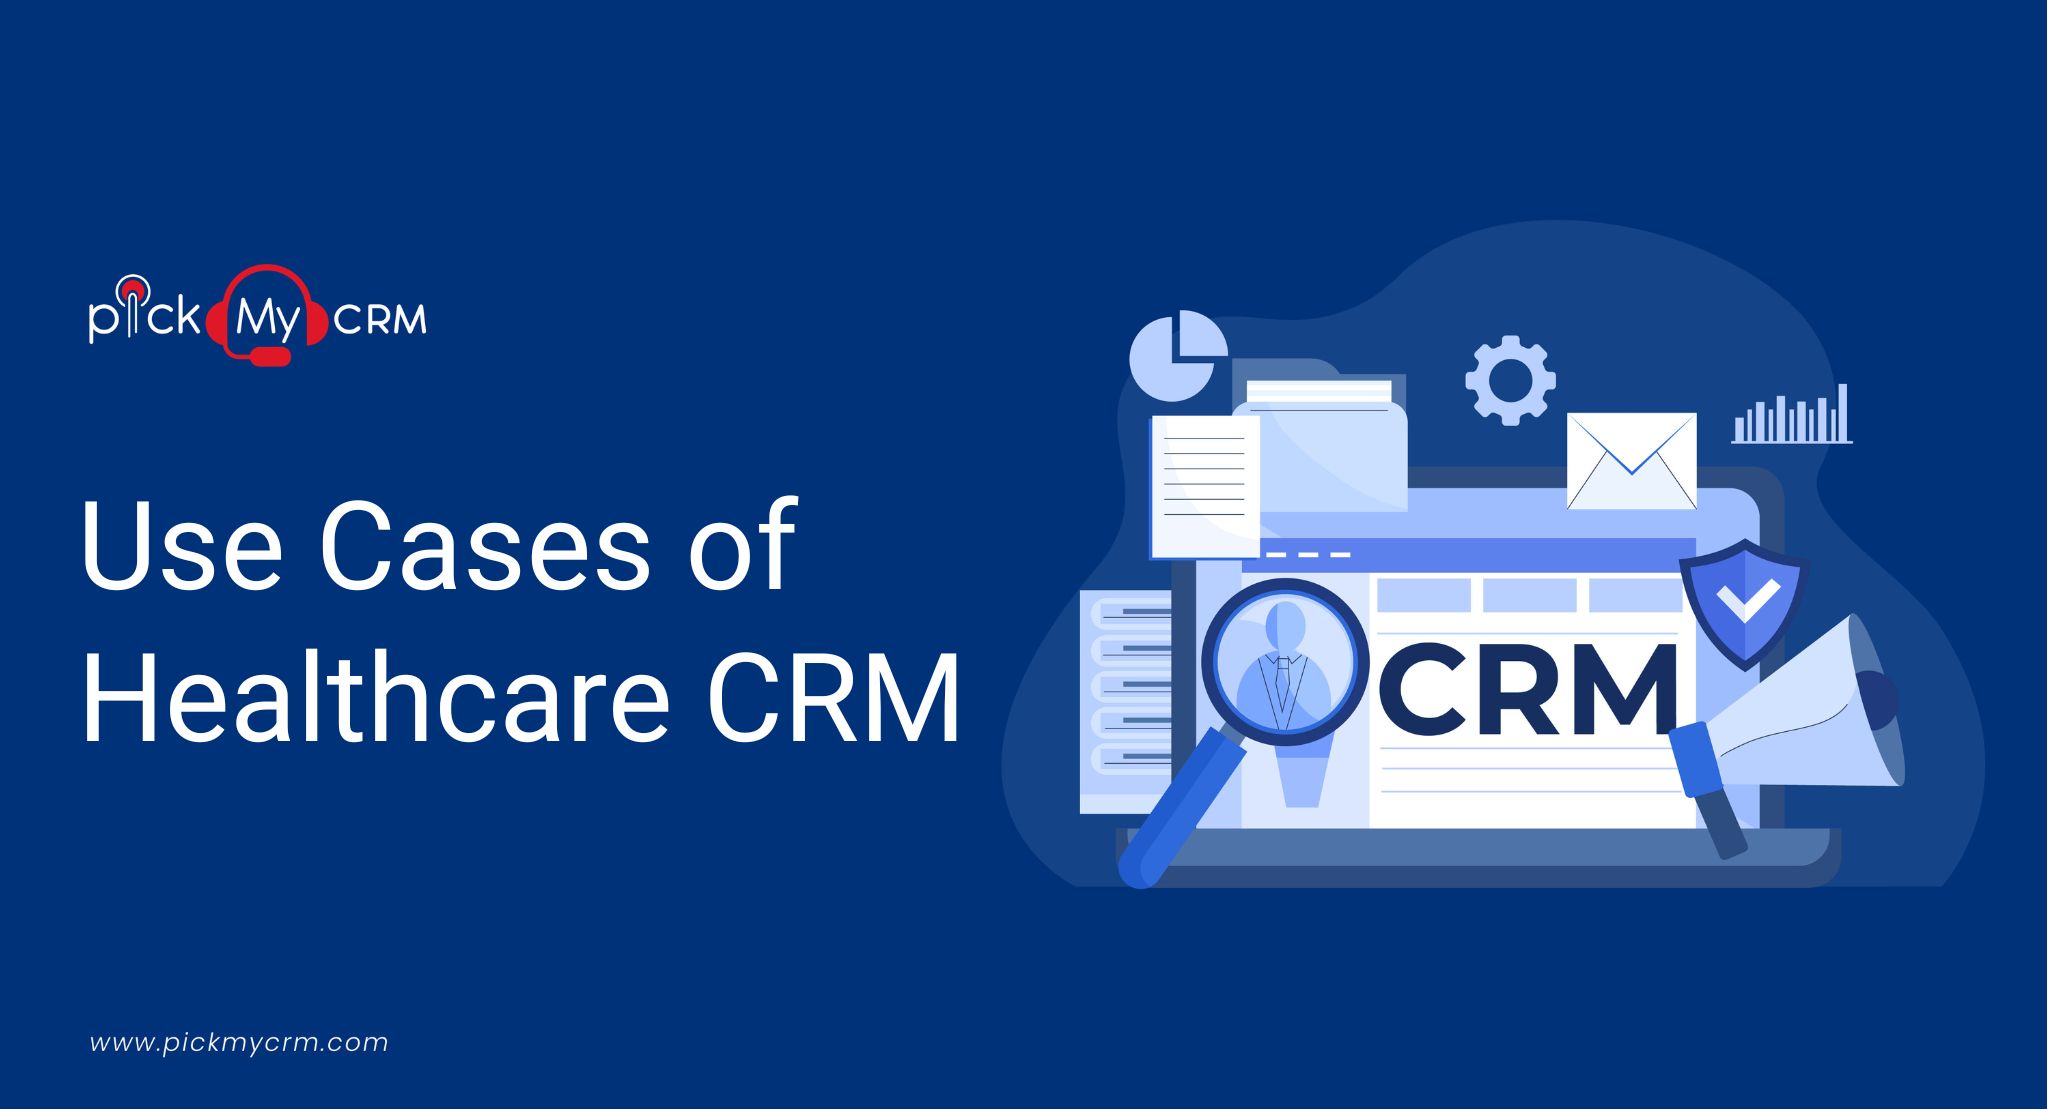 Use Cases of Healthcare CRM